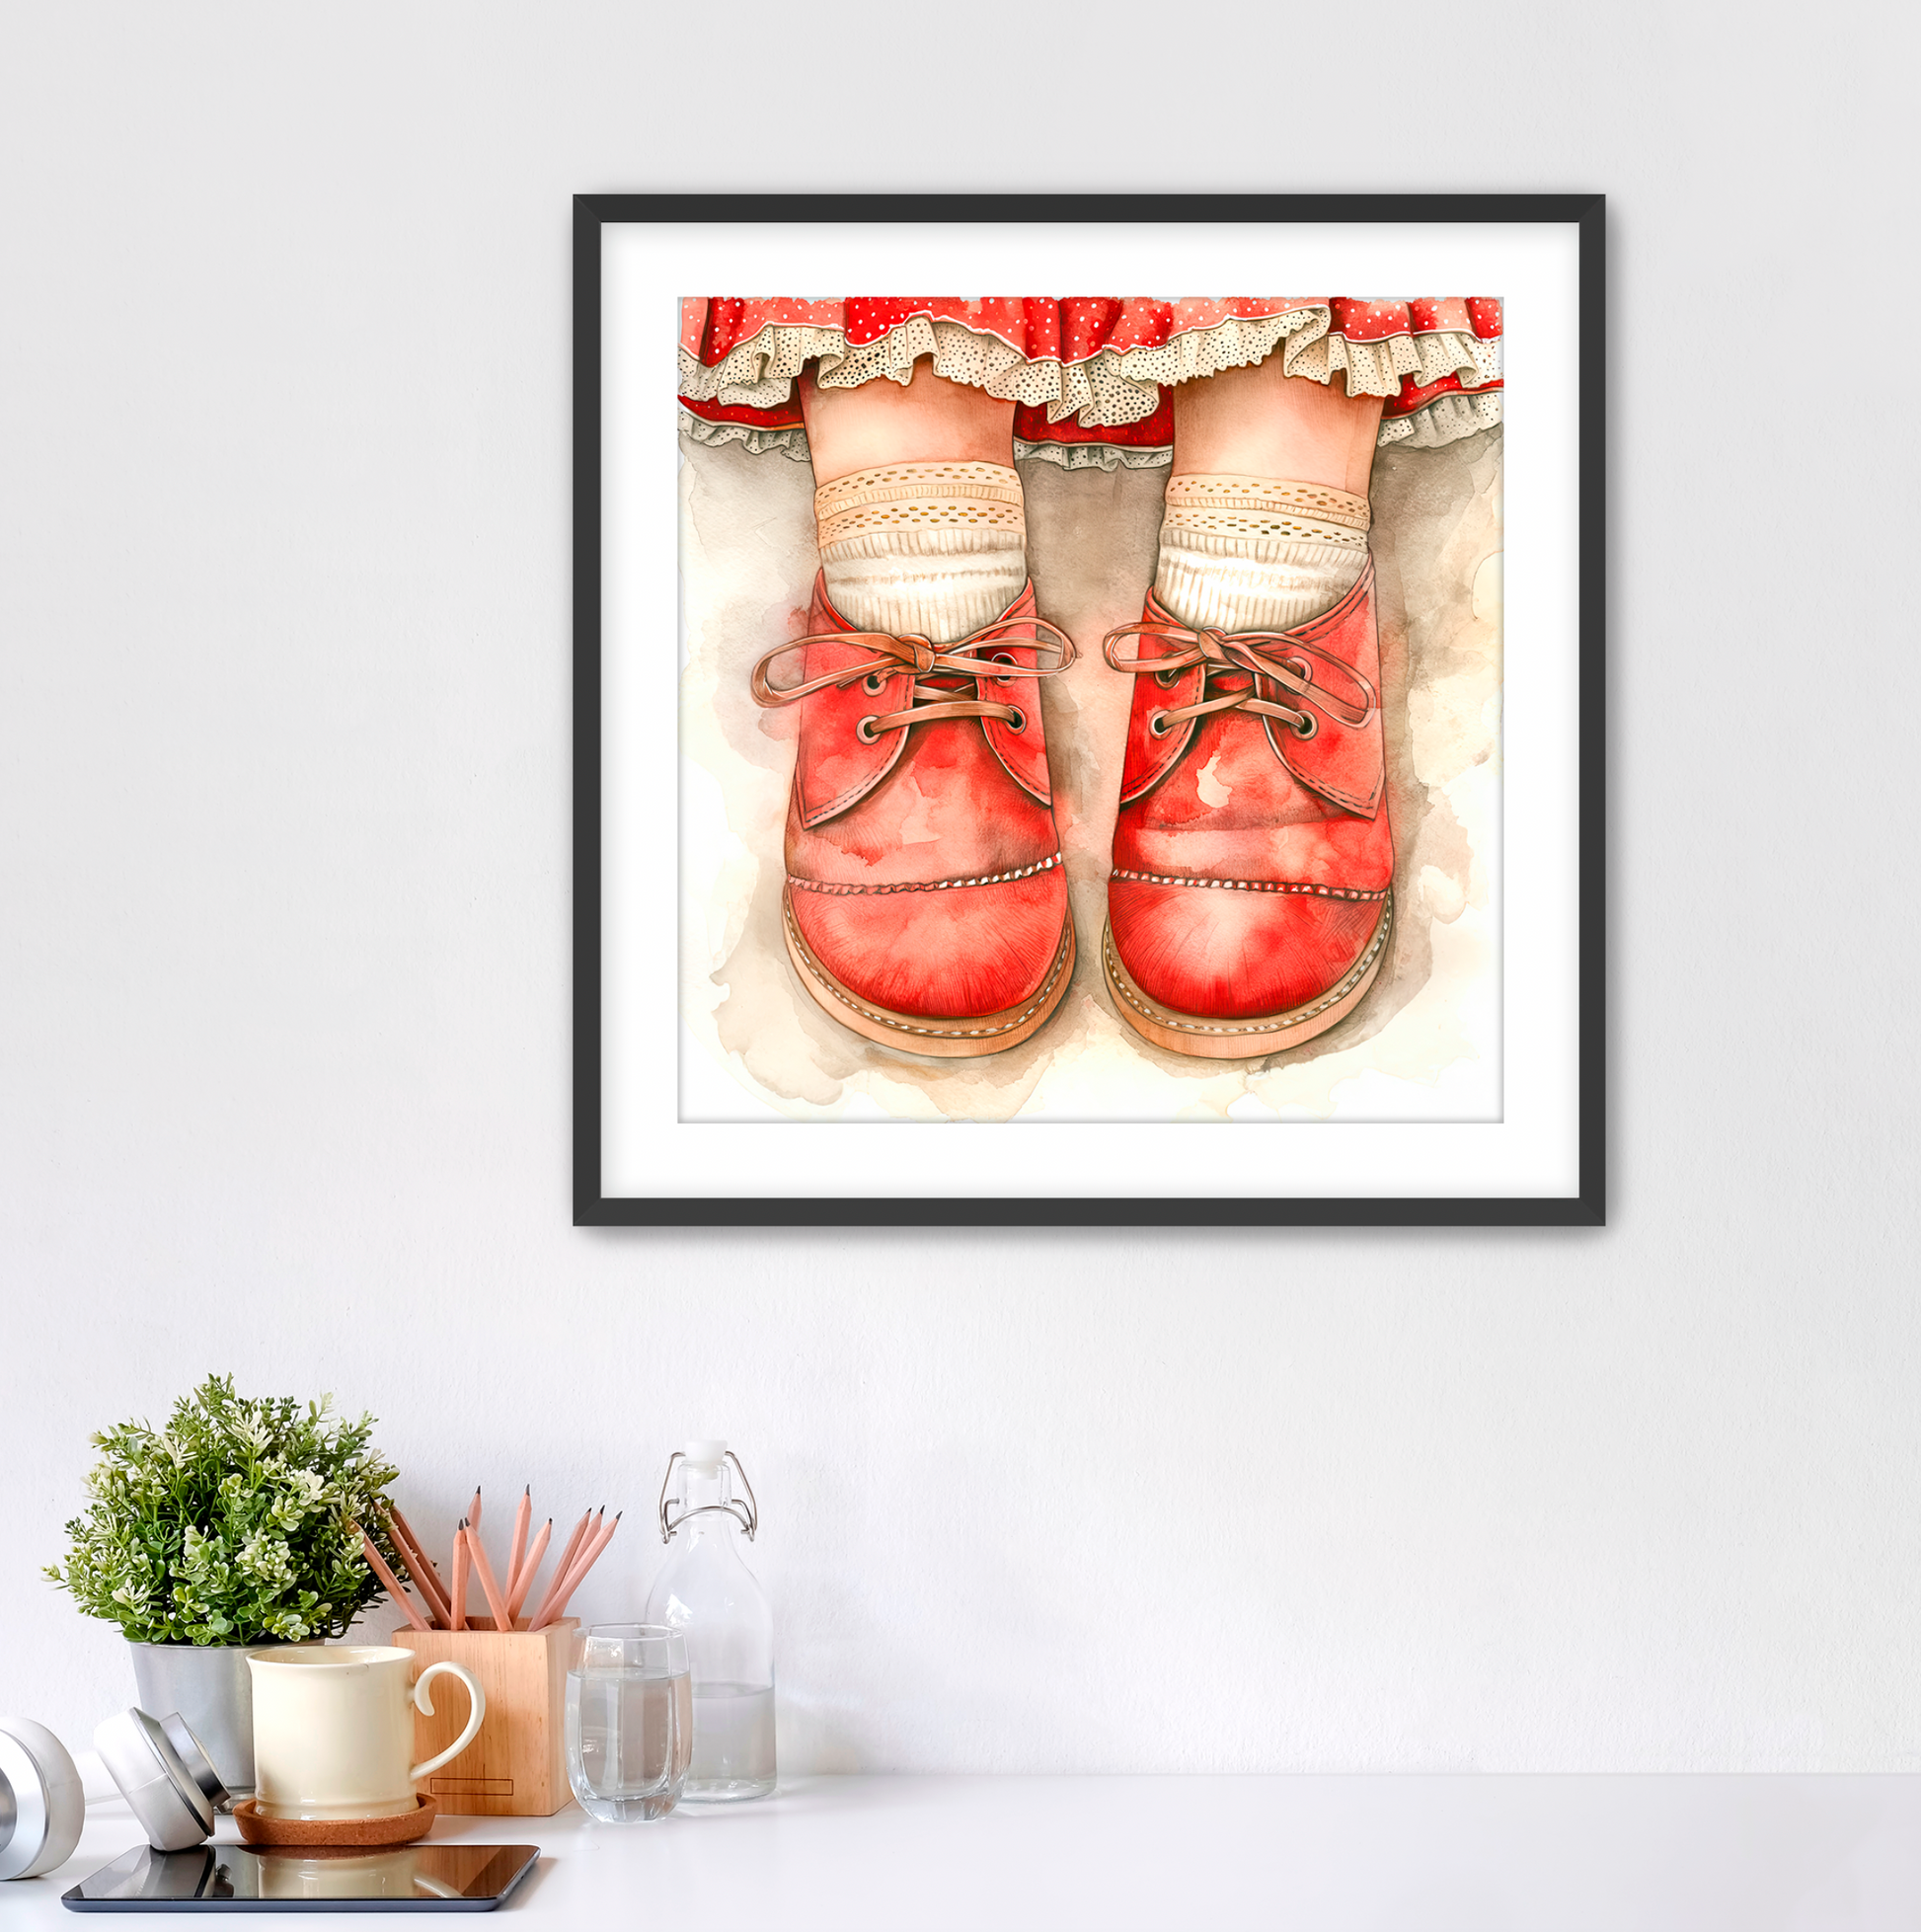 Adorable wall art for kids. Watercolor vintage ensemble showing little girls red shoes closeup with eyelet lace socks and red skirt with tiny white polka dots and lace trim hem. Framed in solid black with white mat. Art for sale at customconcepts.art